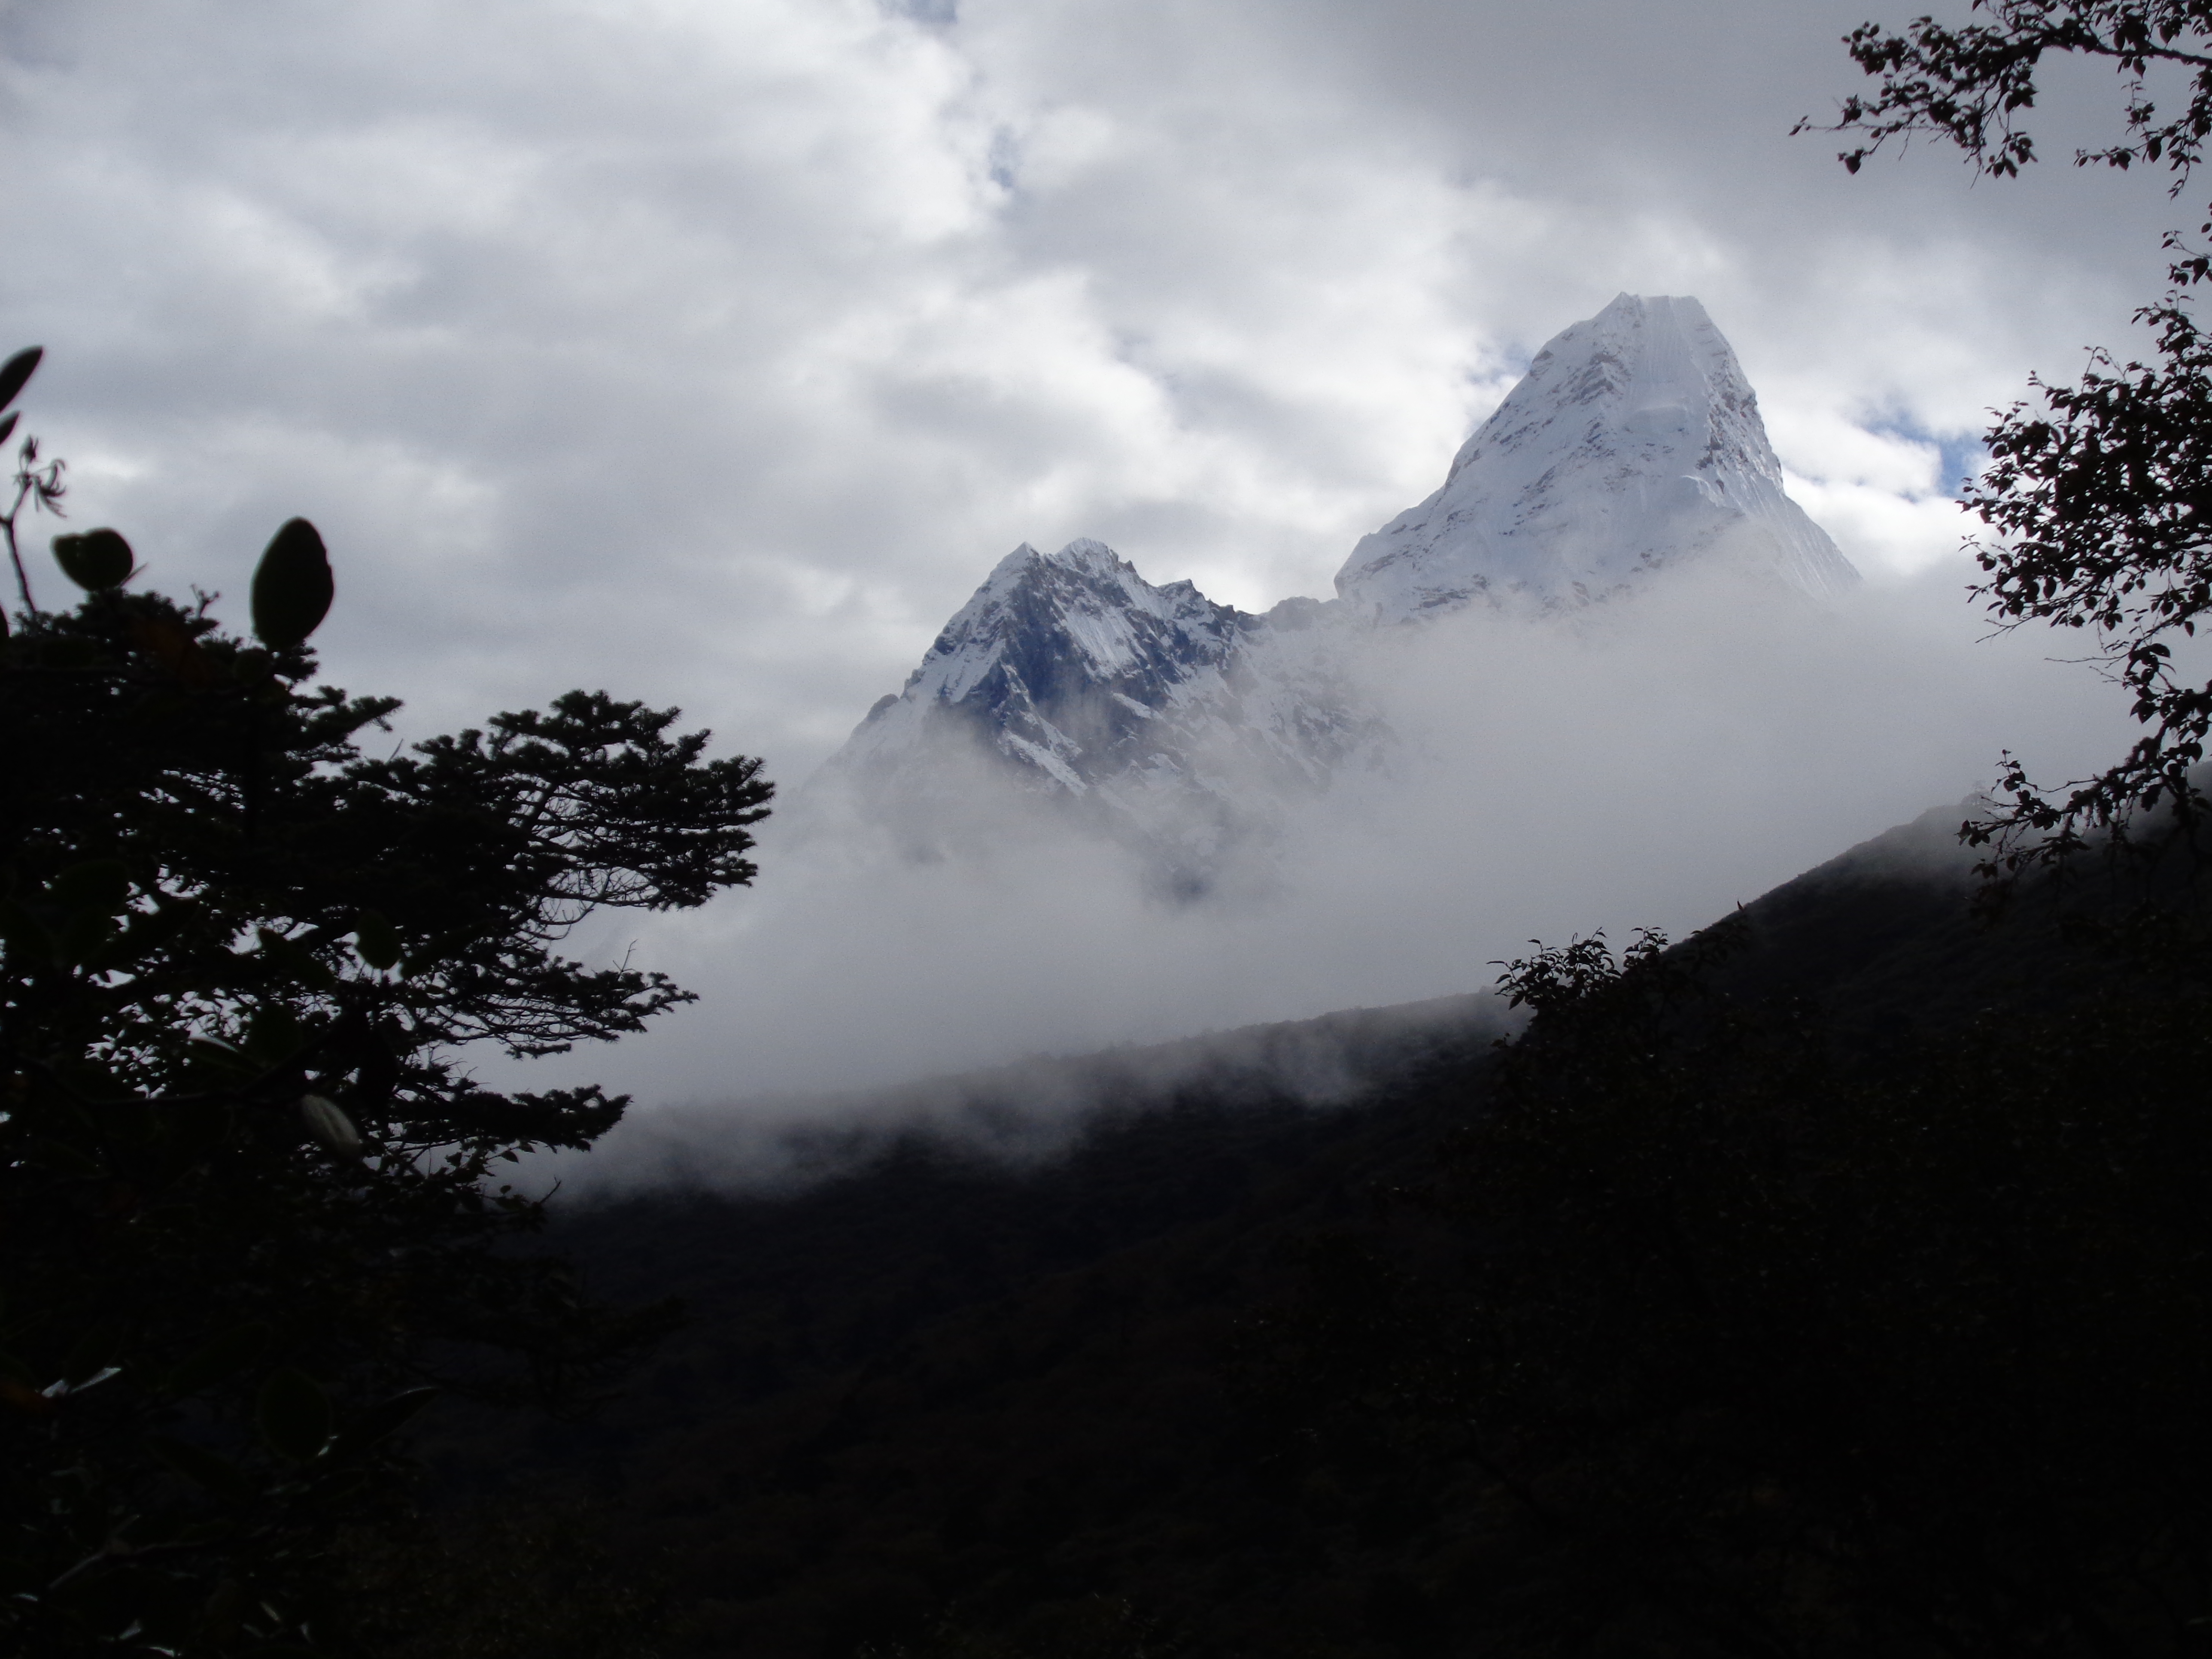 Ama Dablam from the Everest trail